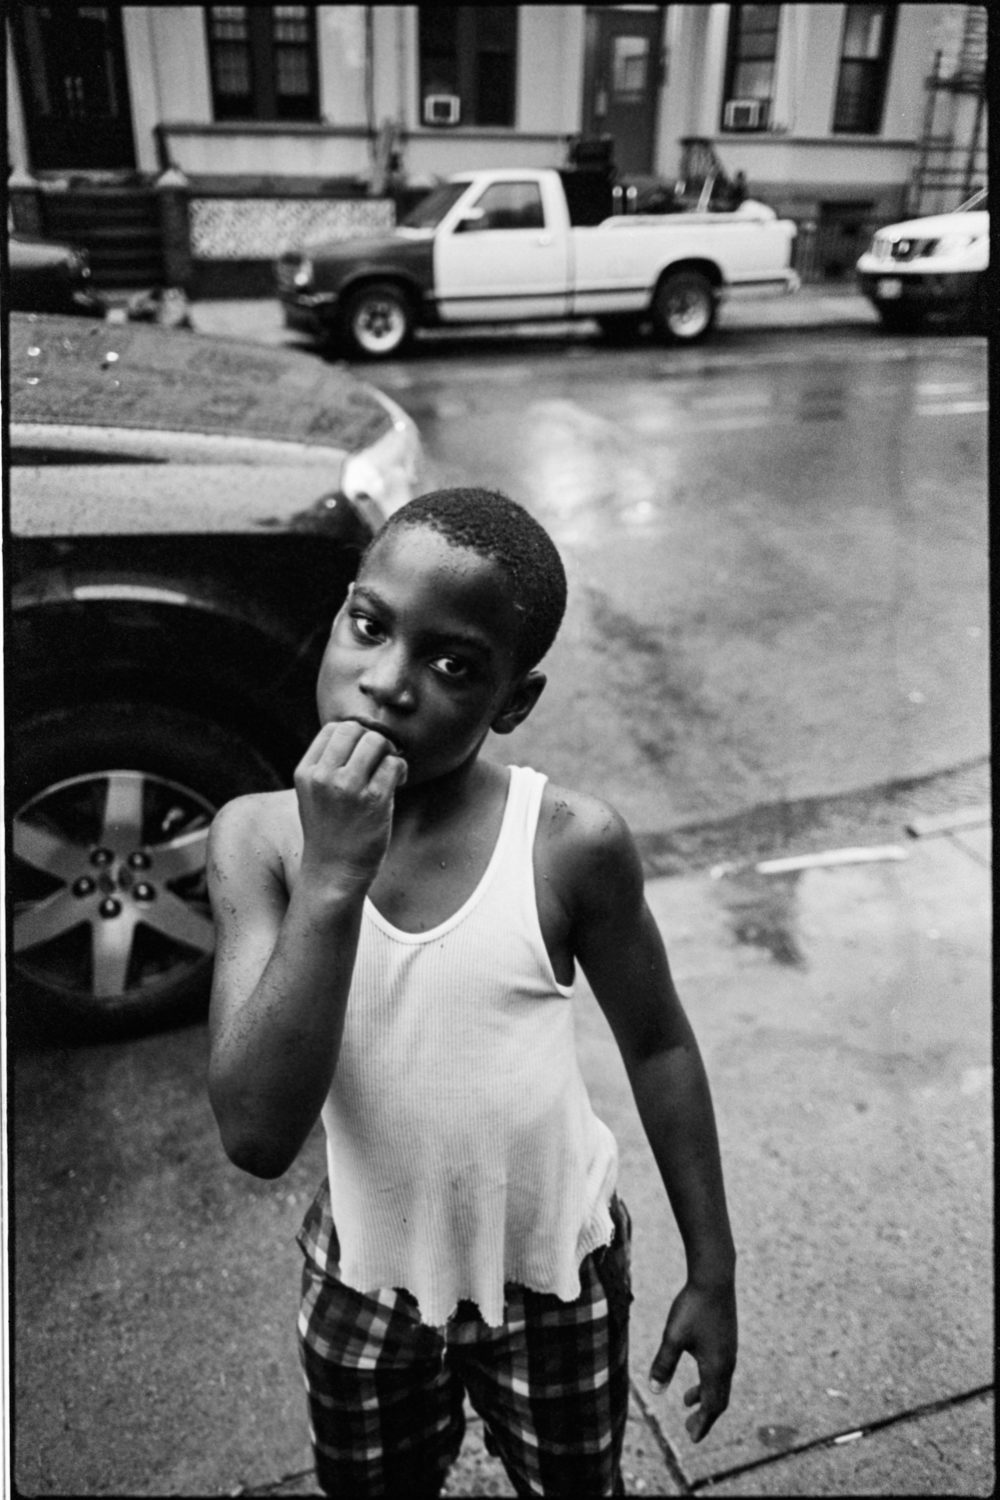 An image of a young boy by photographer Andre D Wagner